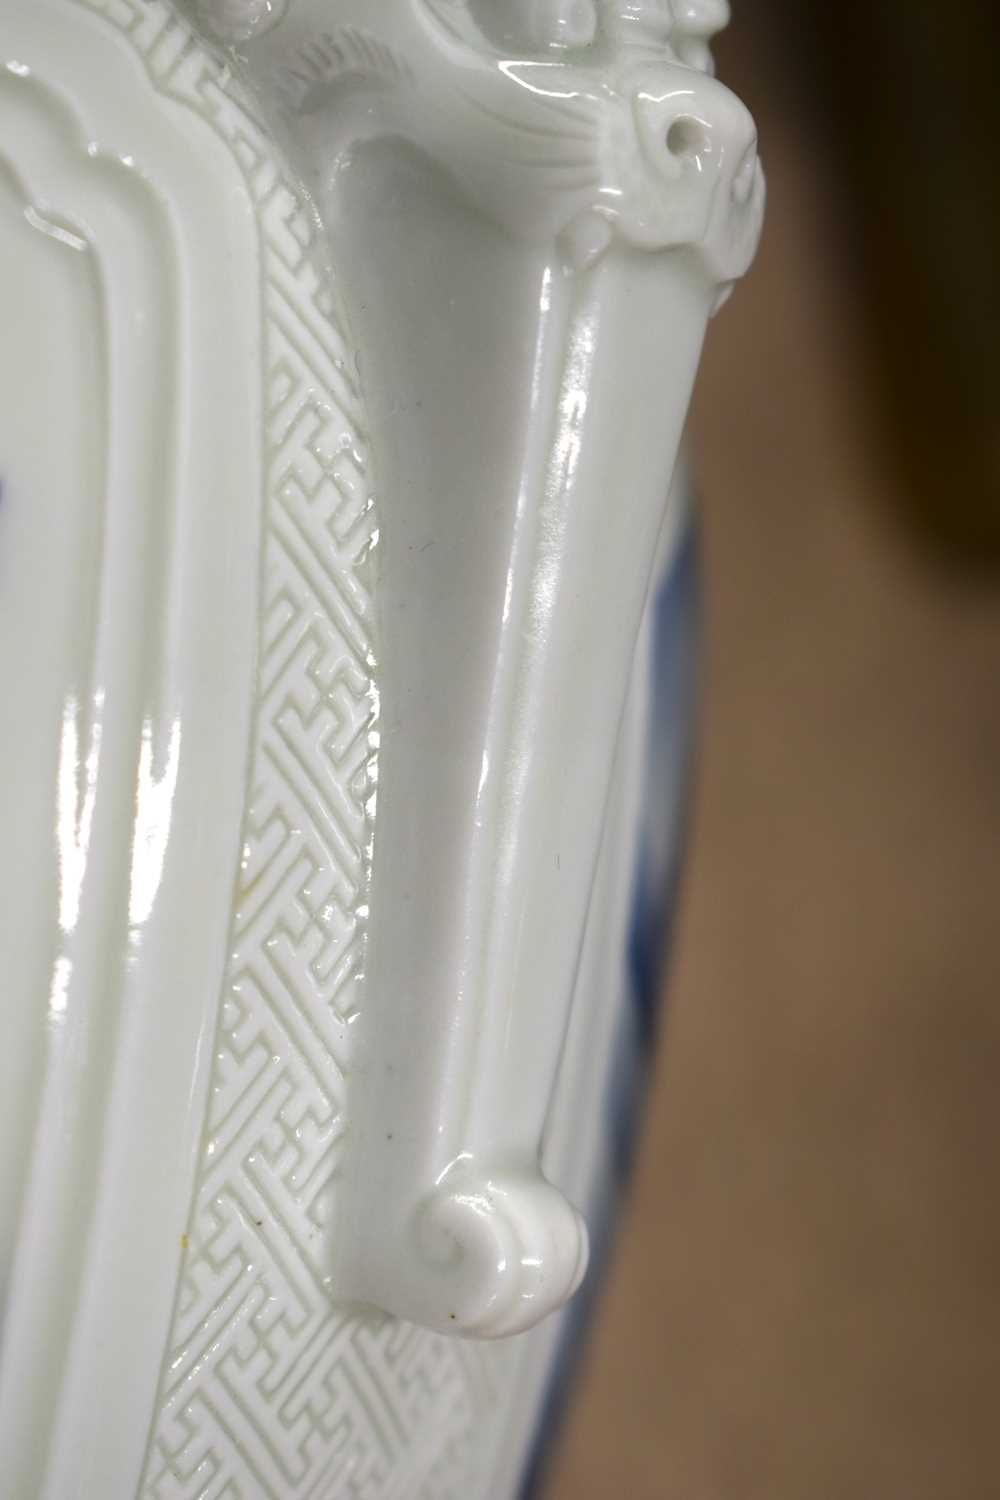 AN IMPORTANT 19TH CENTURY JAPANESE MEIJI PERIOD HIRADO PORCELAIN VASE of exceptional quality, - Image 9 of 27